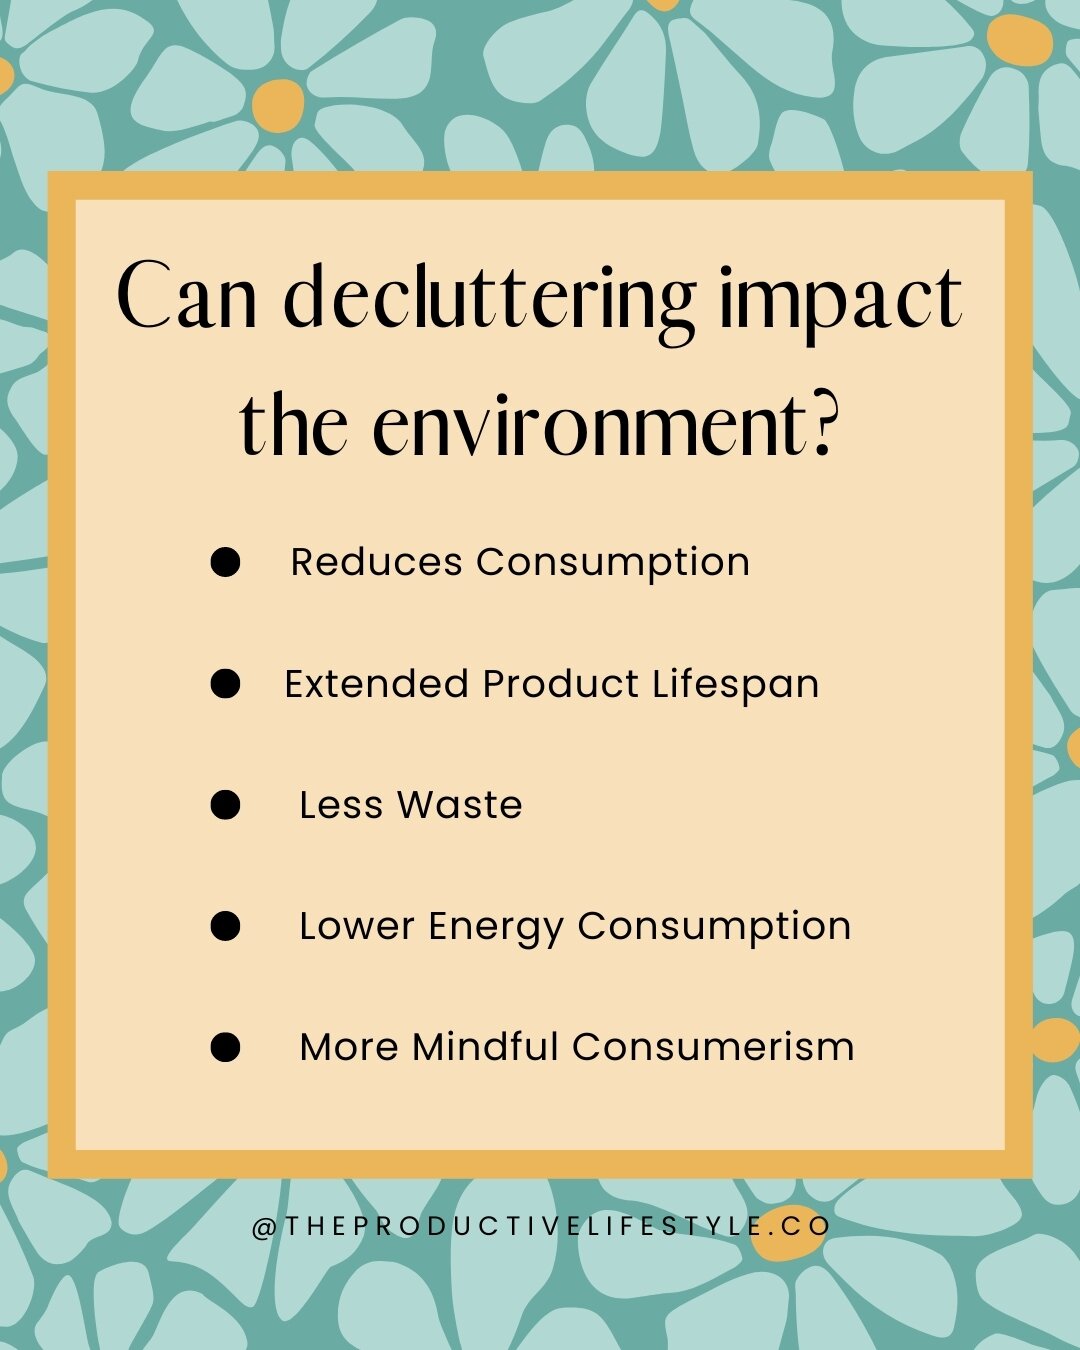 Day 4: Spring Clearing for the Planet!
Did you know decluttering can help reduce waste? By letting go of unused items, we lessen the environmental impact of production
🌳Reduced Consumption: By decluttering, you take stock of what you already own and